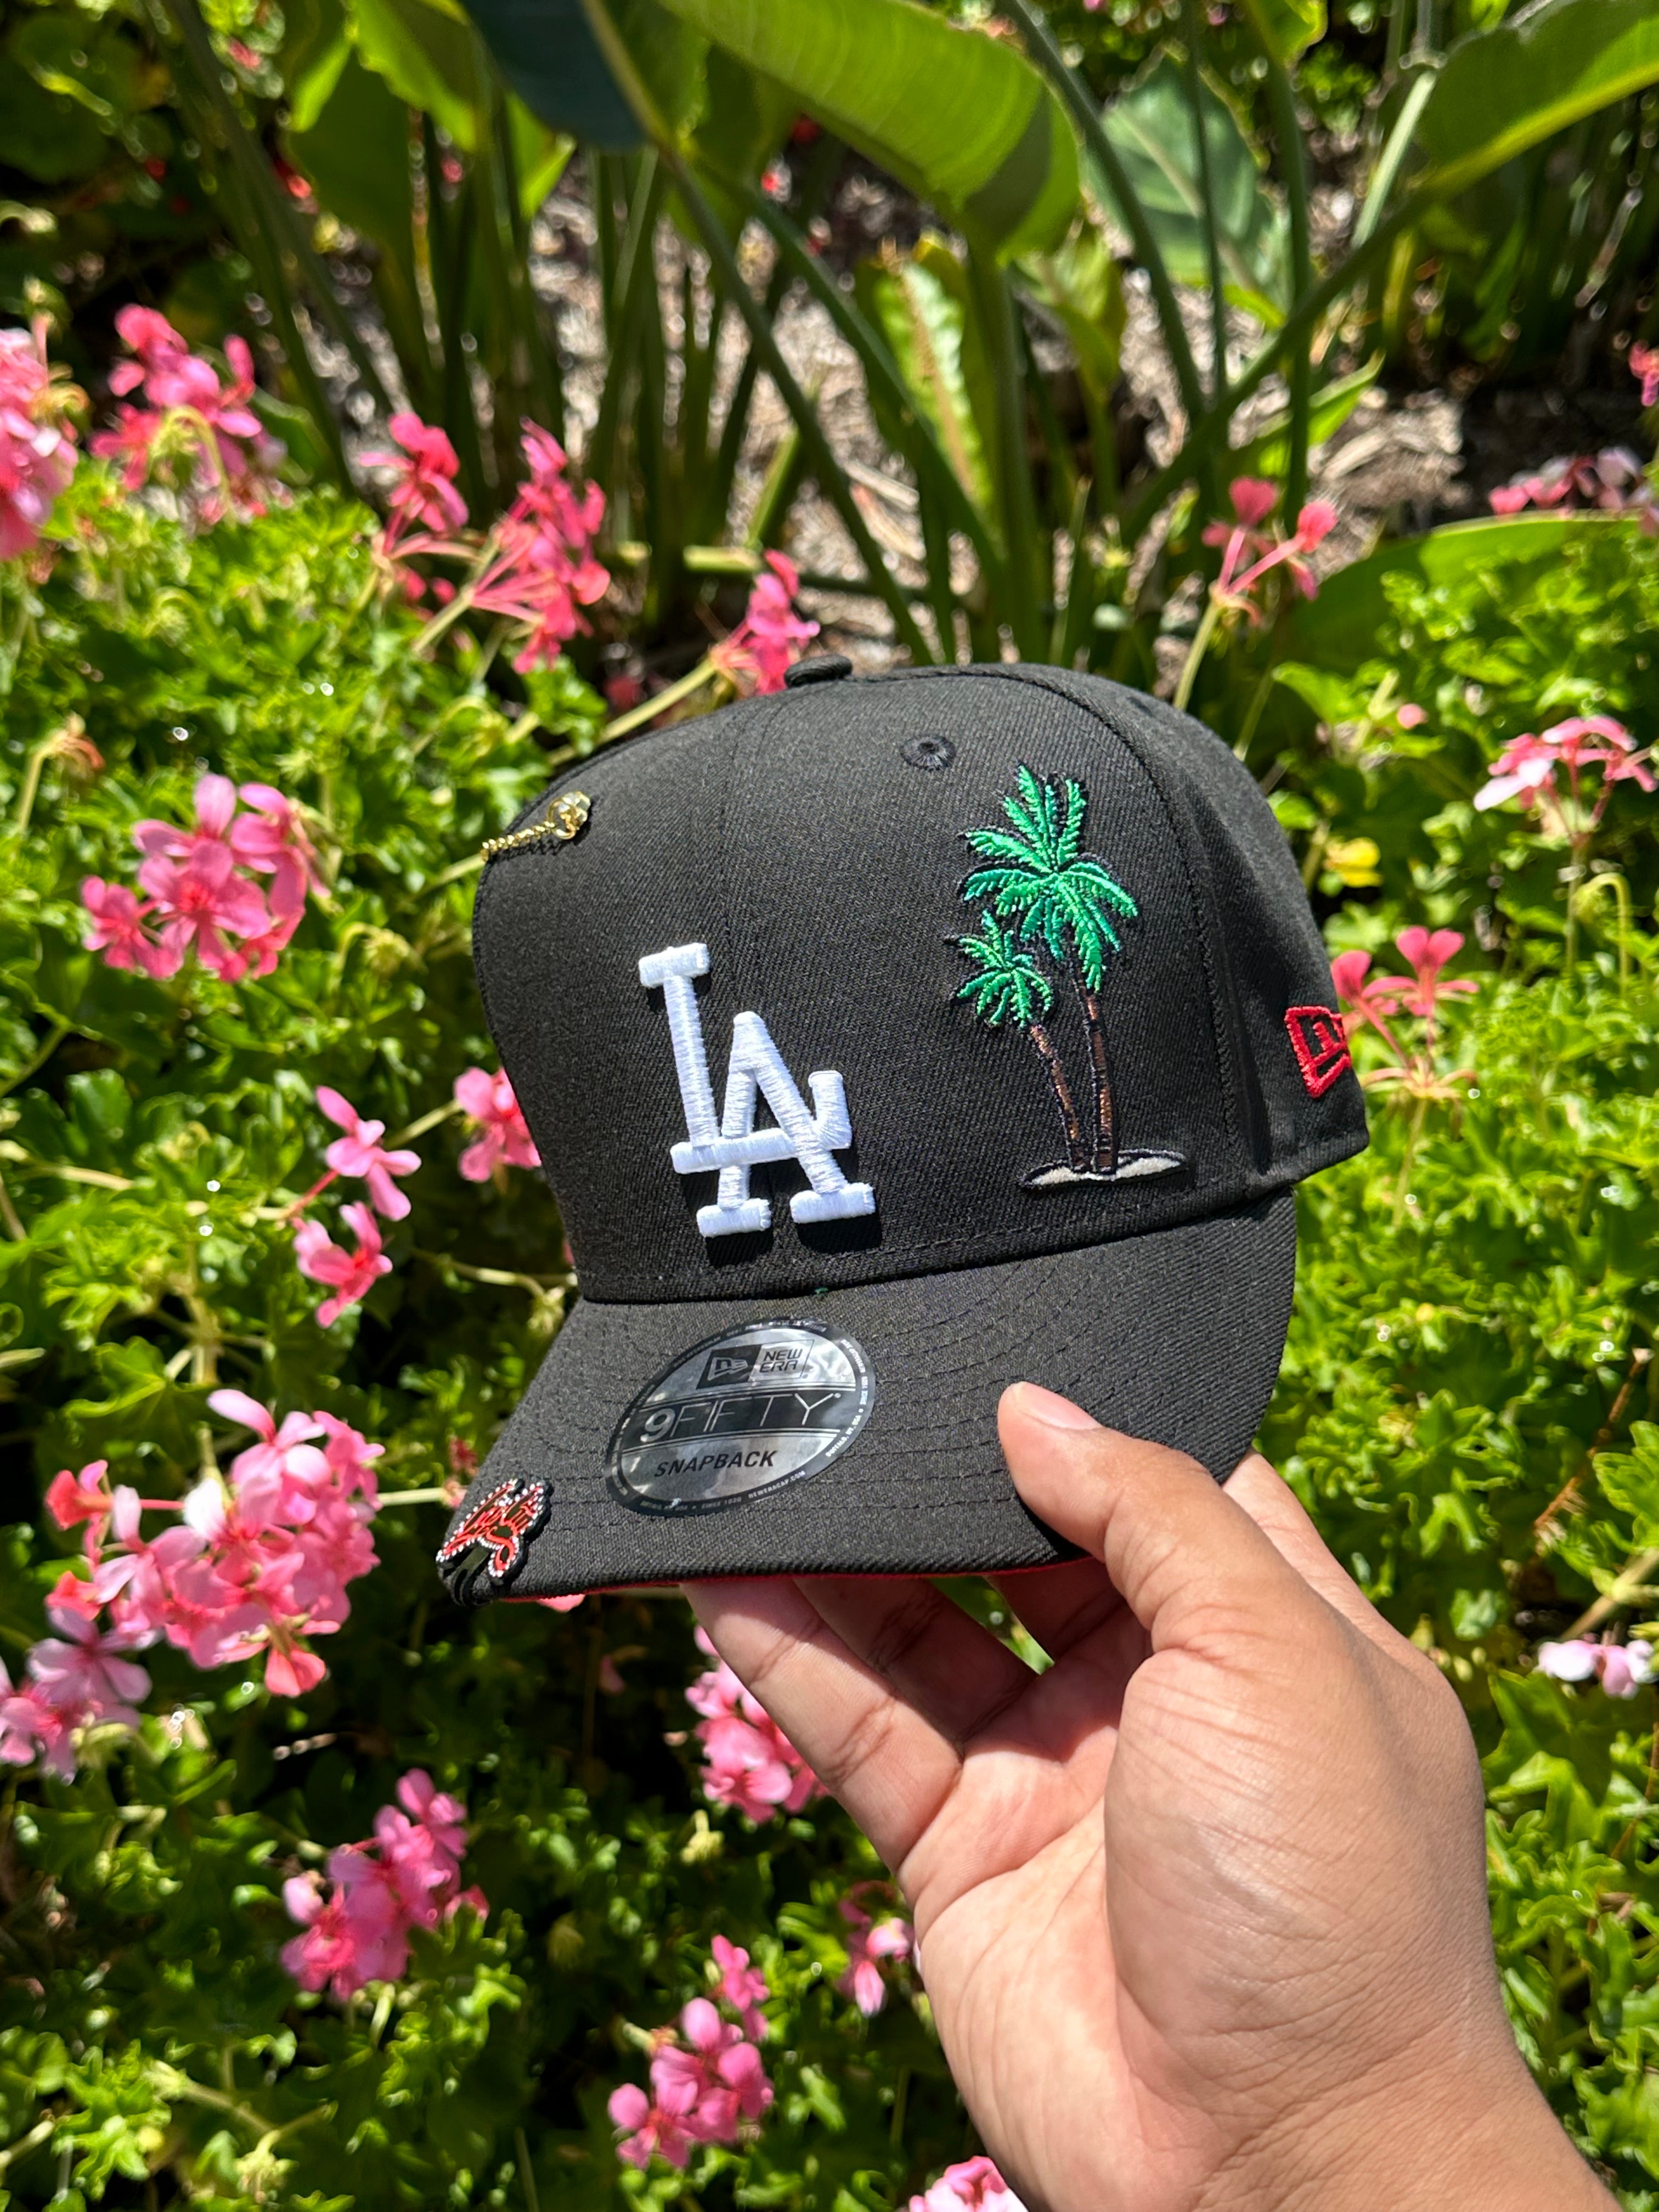 NEW ERA EXCLUSIVE 9FIFTY BLACK LOS ANGELES DODGERS SNAPBACK W/ PALM TREE + 50TH ANNIVERSARY PATCH